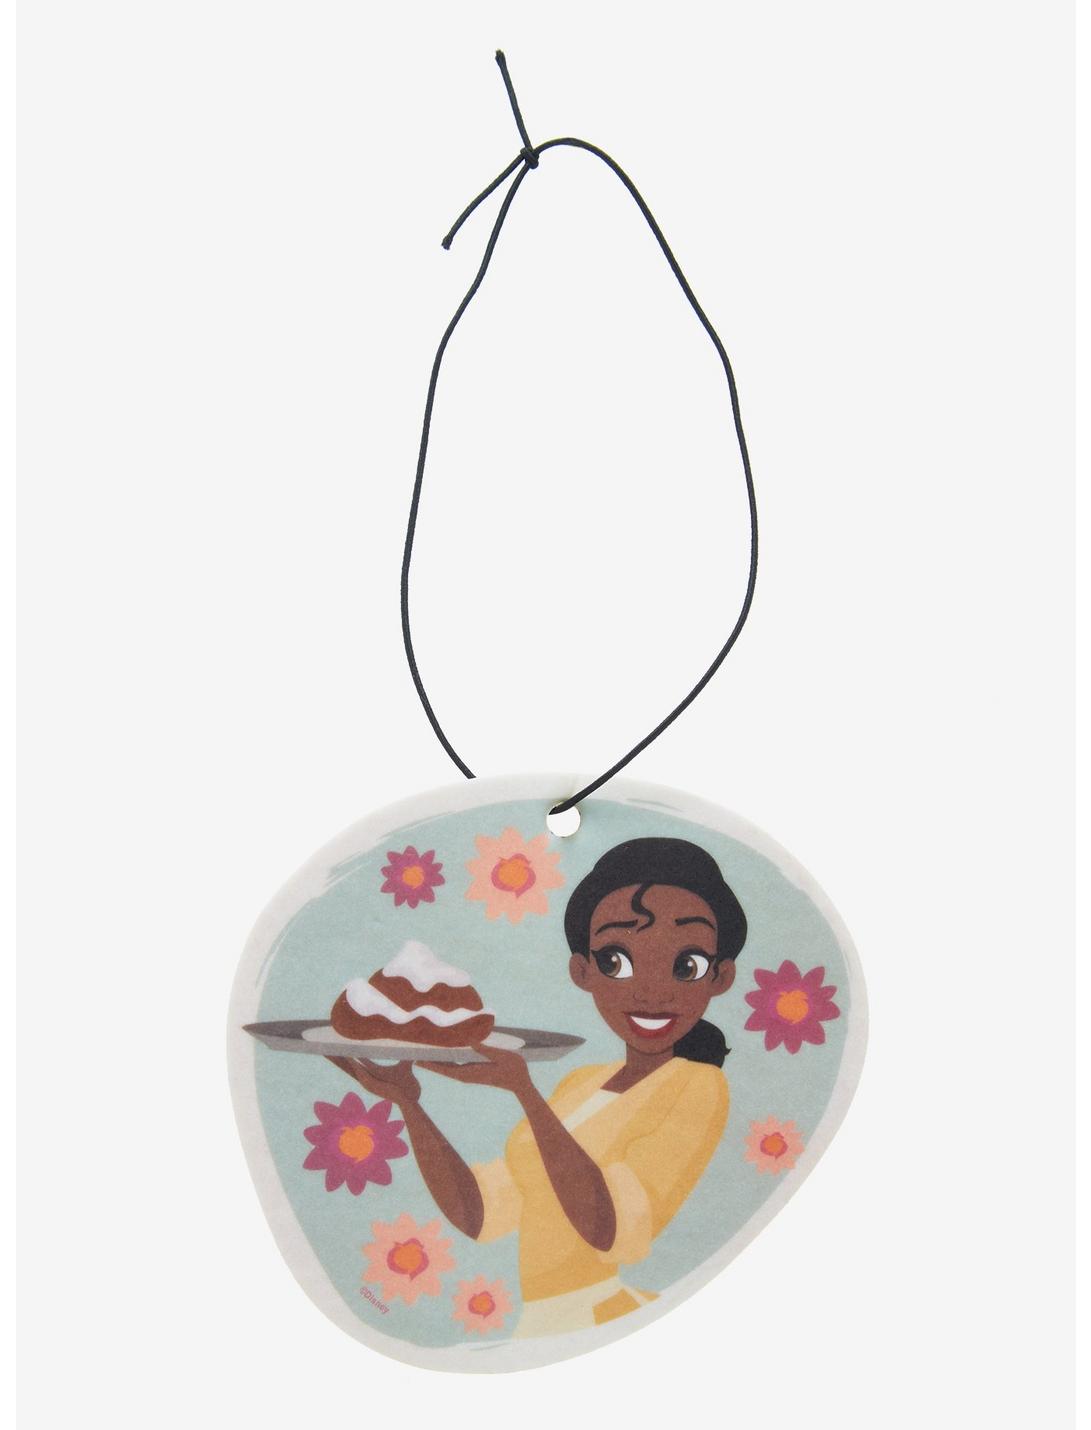 Disney The Princess and the Frog Tiana with Beignets Vanilla Scented Air Freshener - BoxLunch Exclusive, , hi-res